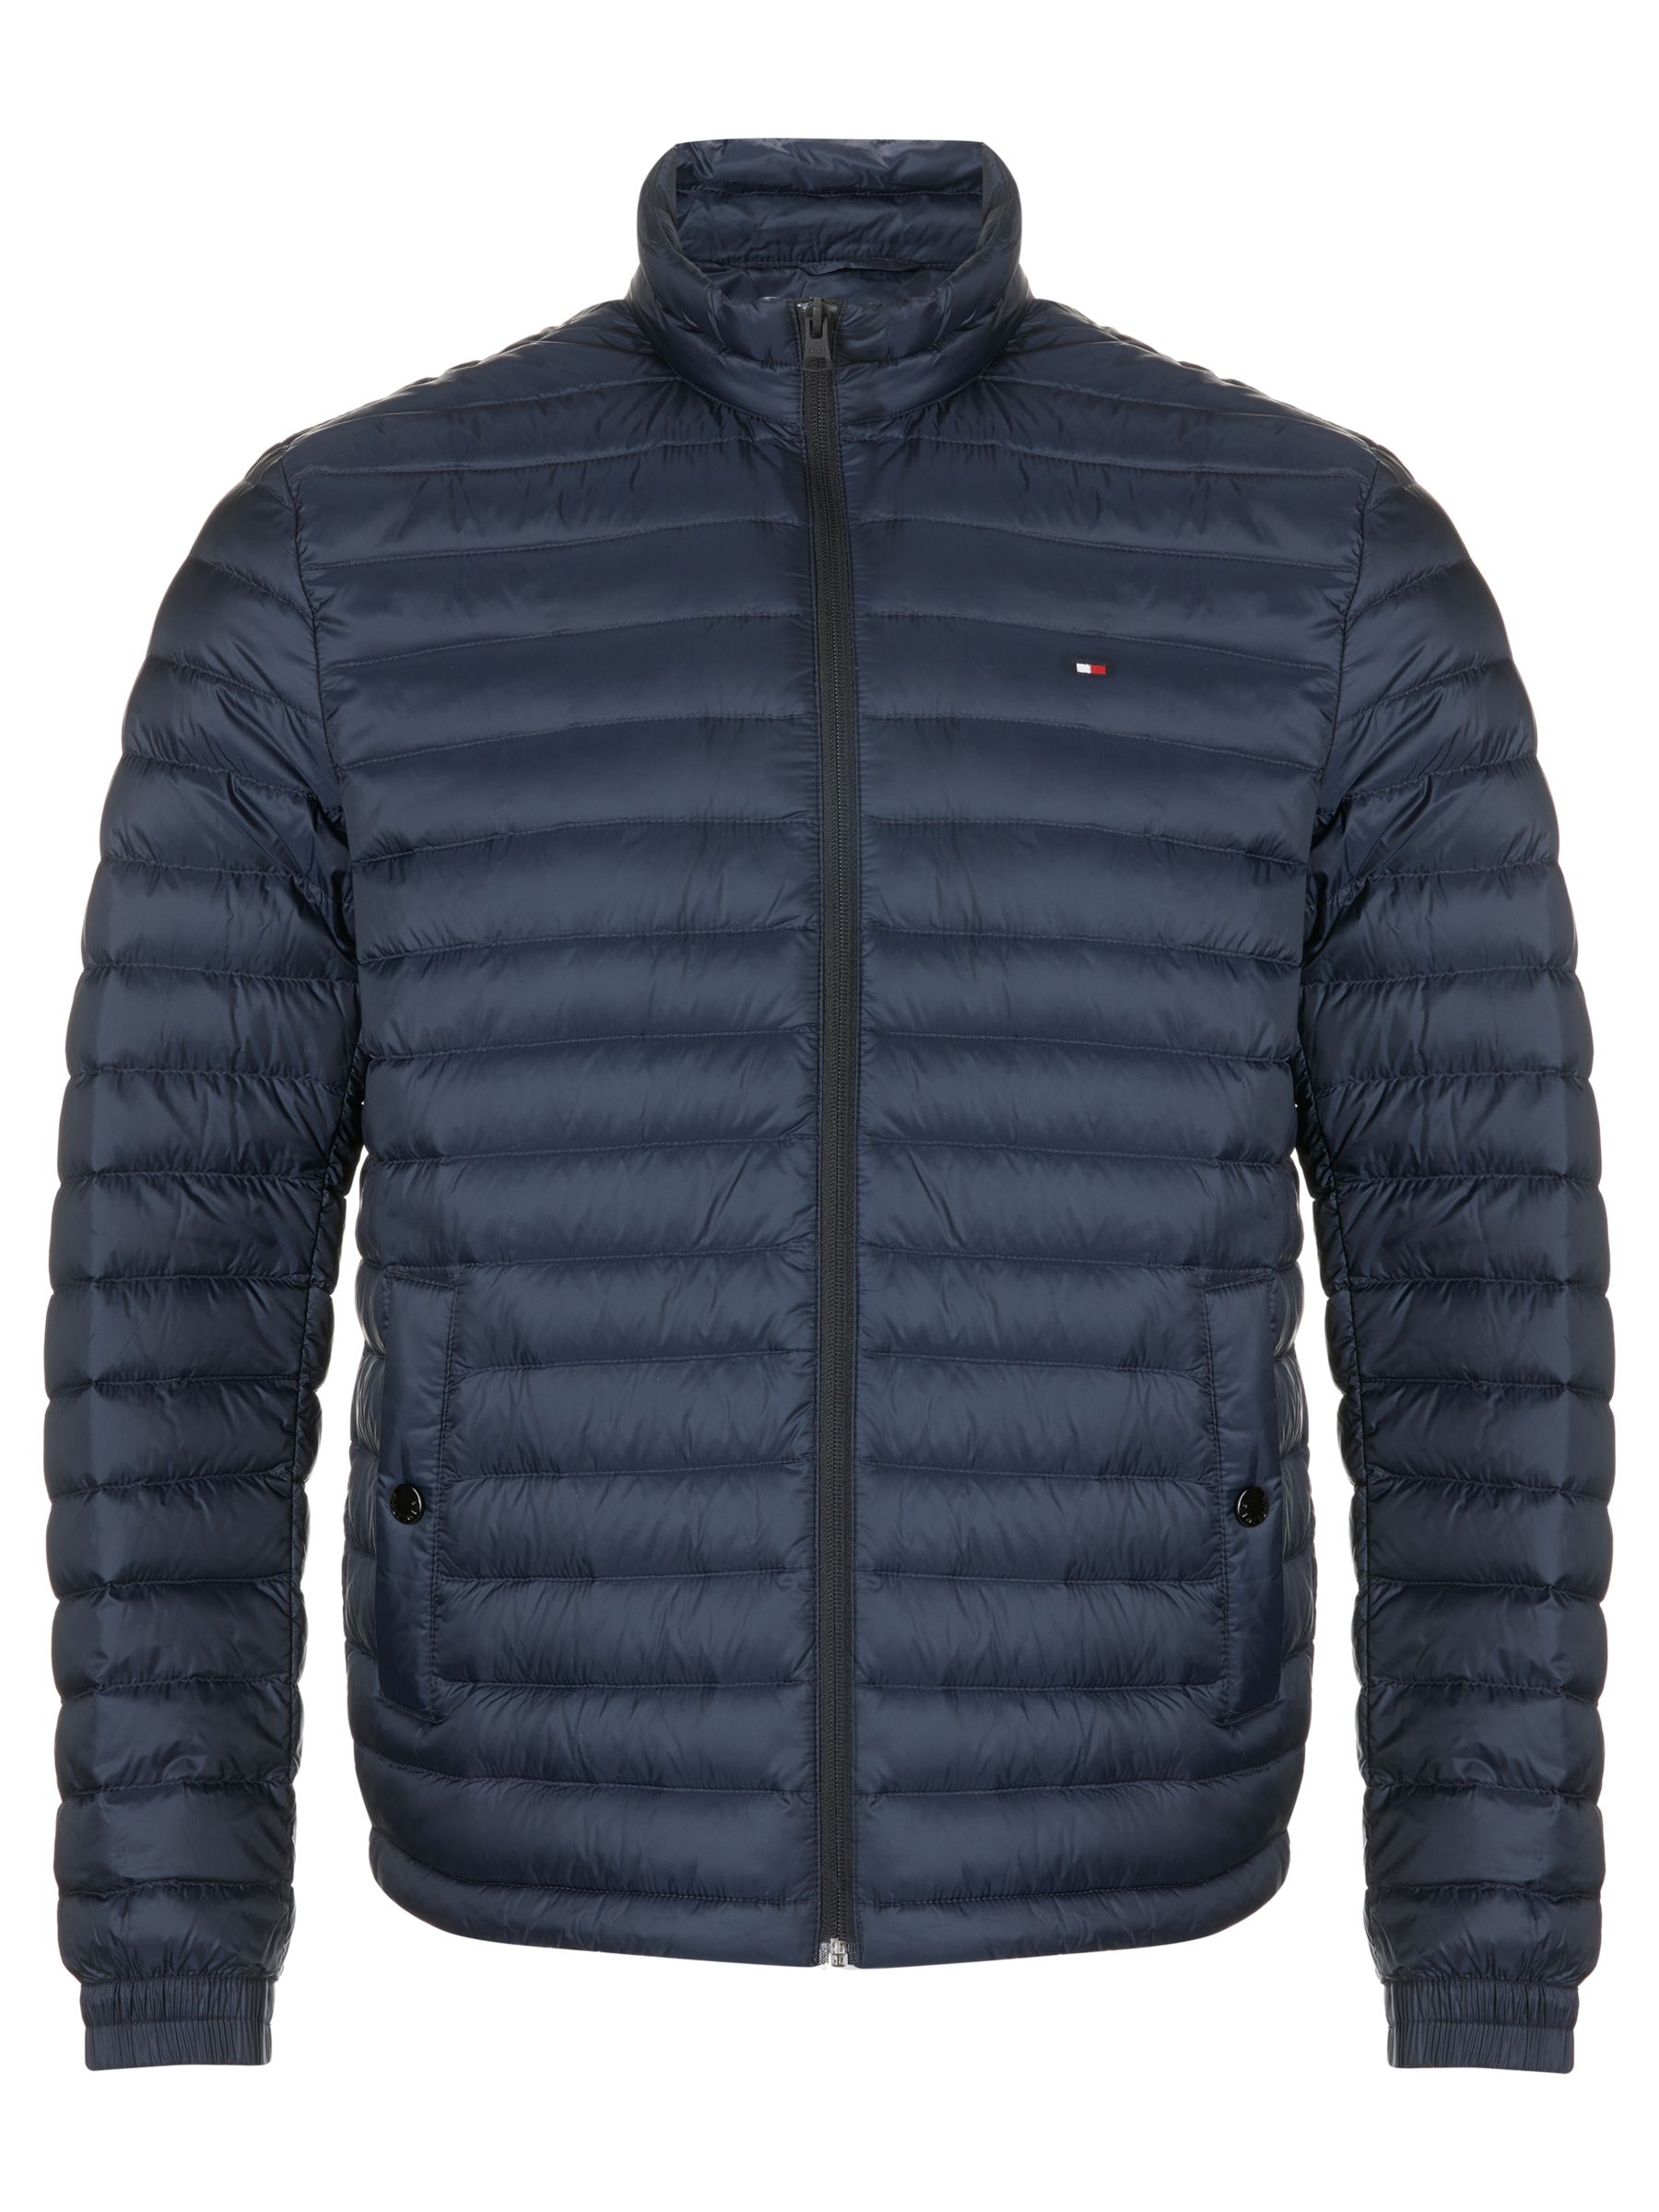 Tommy Hilfiger Packable Down Bomber Jacket, Navy at John Lewis & Partners